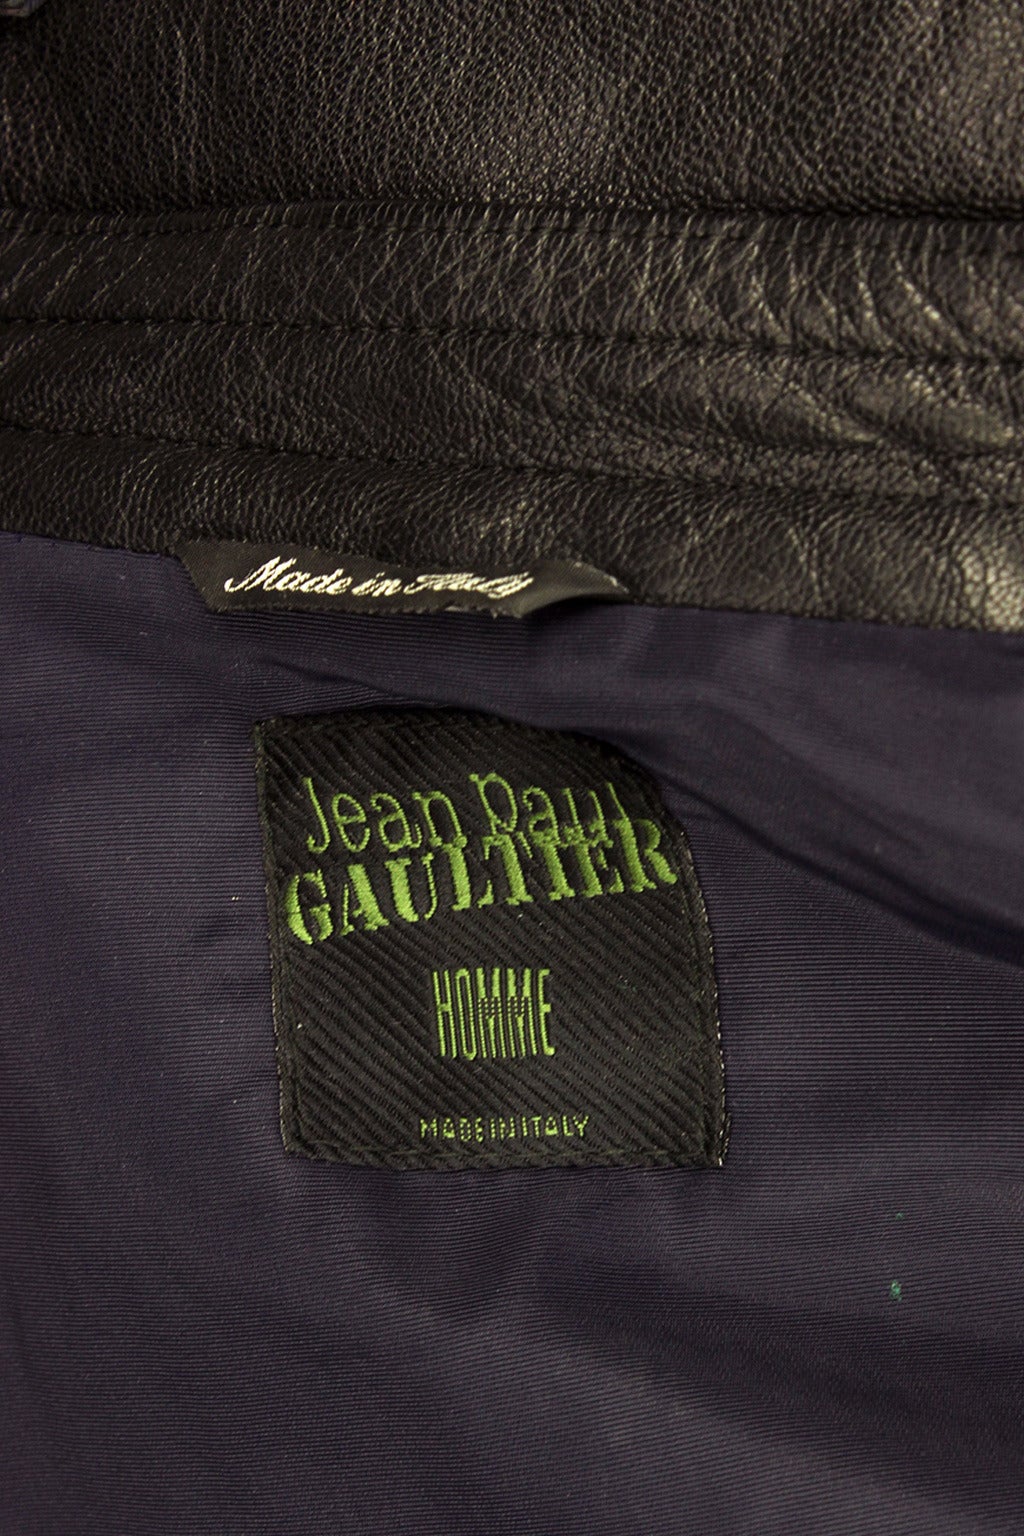 Jean Paul Gaultier Men's 1990s Highly Styled Leather Moto Jacket 6